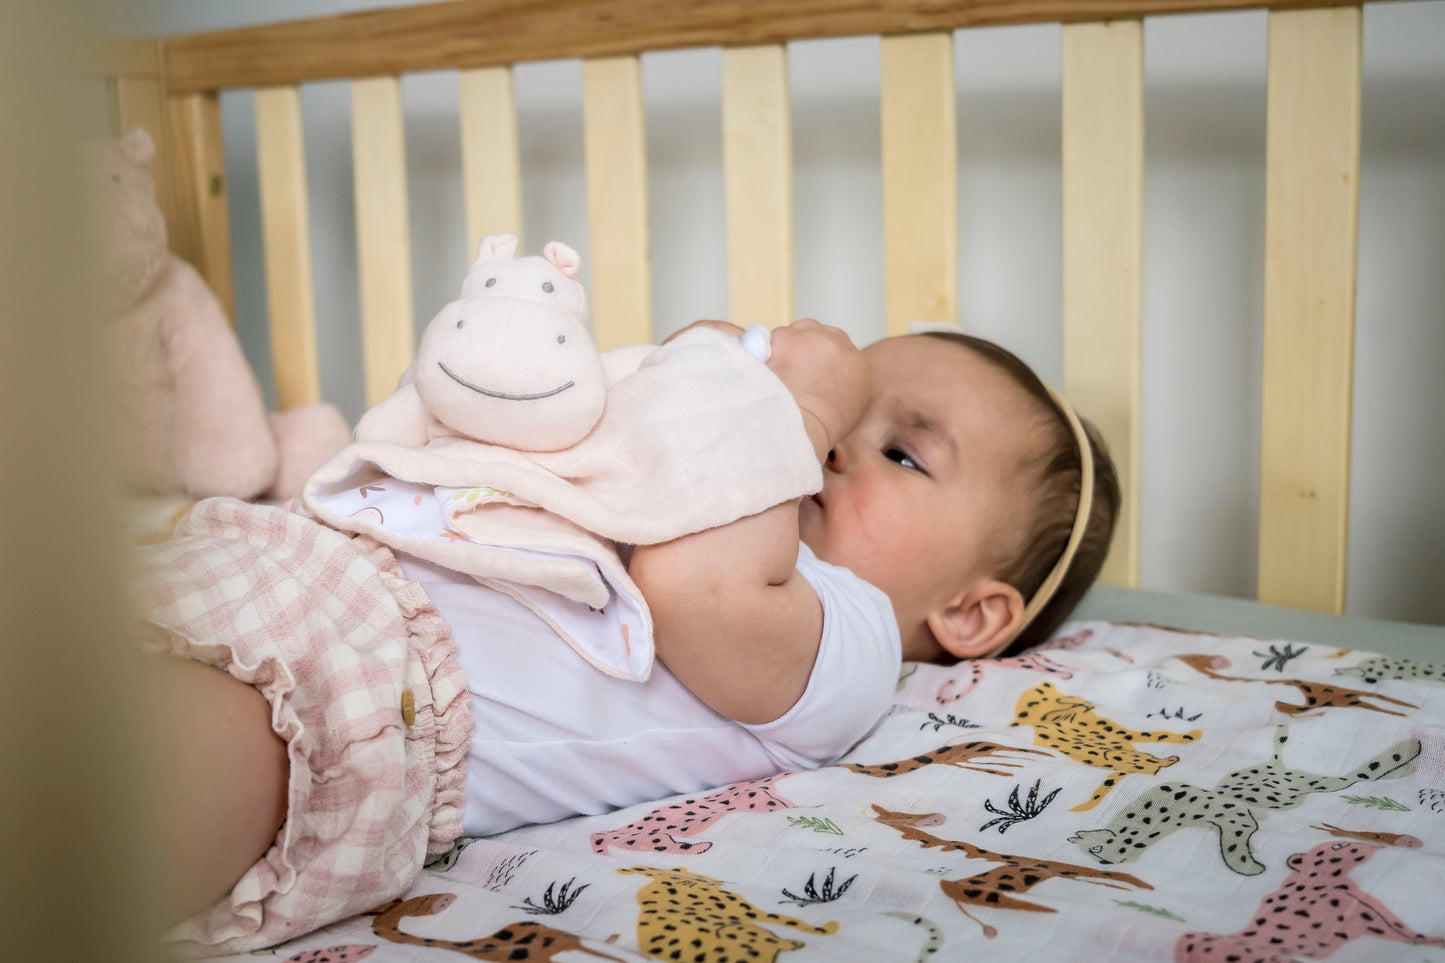 Hippo Comforter with Rubber Teether